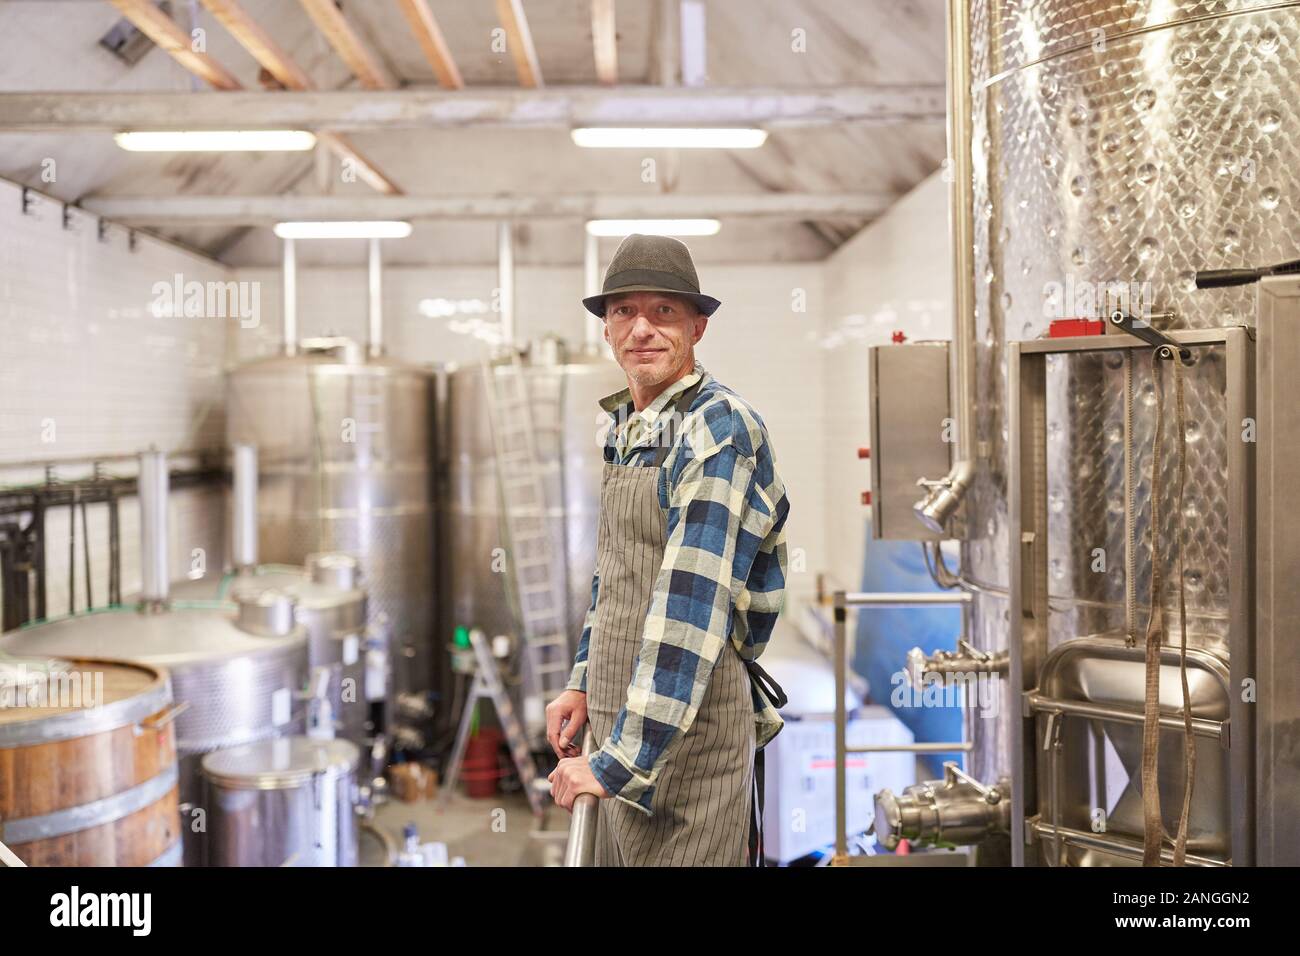 Man as a winemaker or master brewer in the winery or brewery Stock Photo